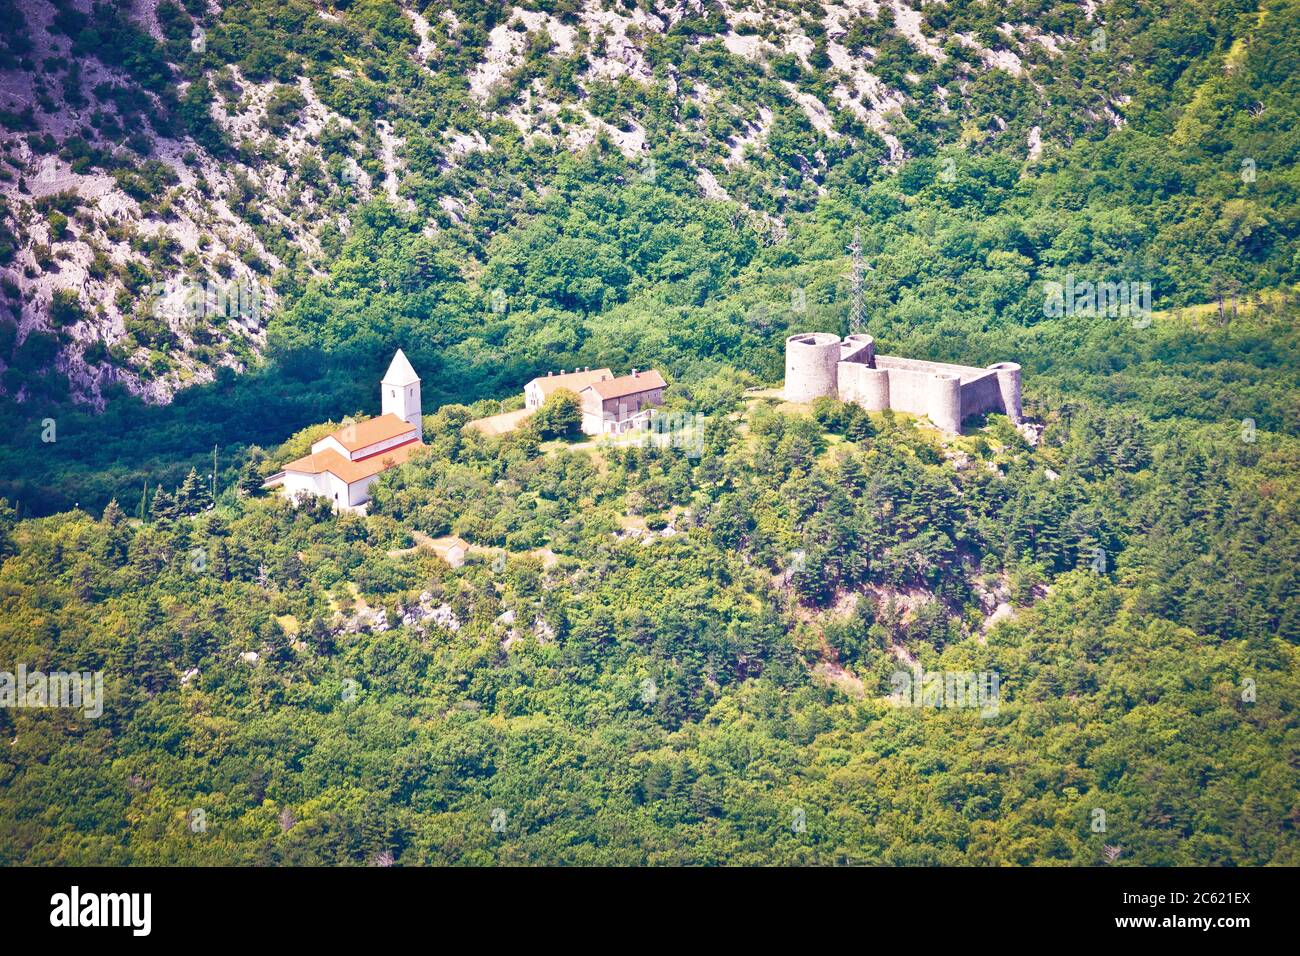 Historic Drivenik fortress and church on the hill in Vinodol valley aerial view, Kvarner region of Croatia Stock Photo